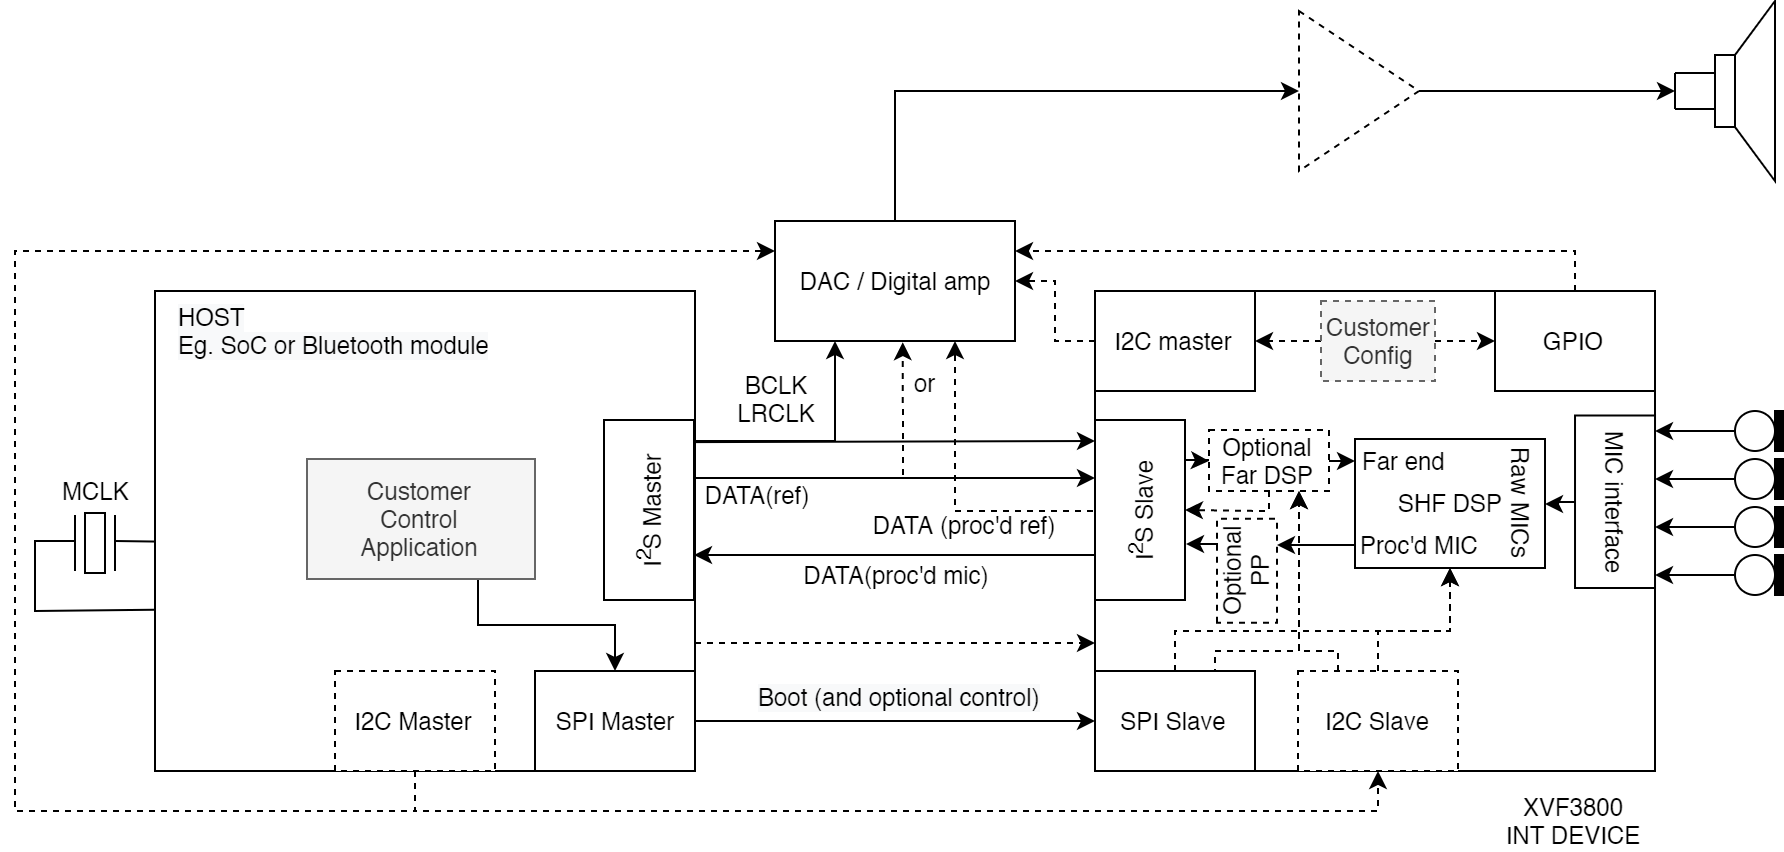 ../../_images/XVF3800_system_diagram_INT_device.png